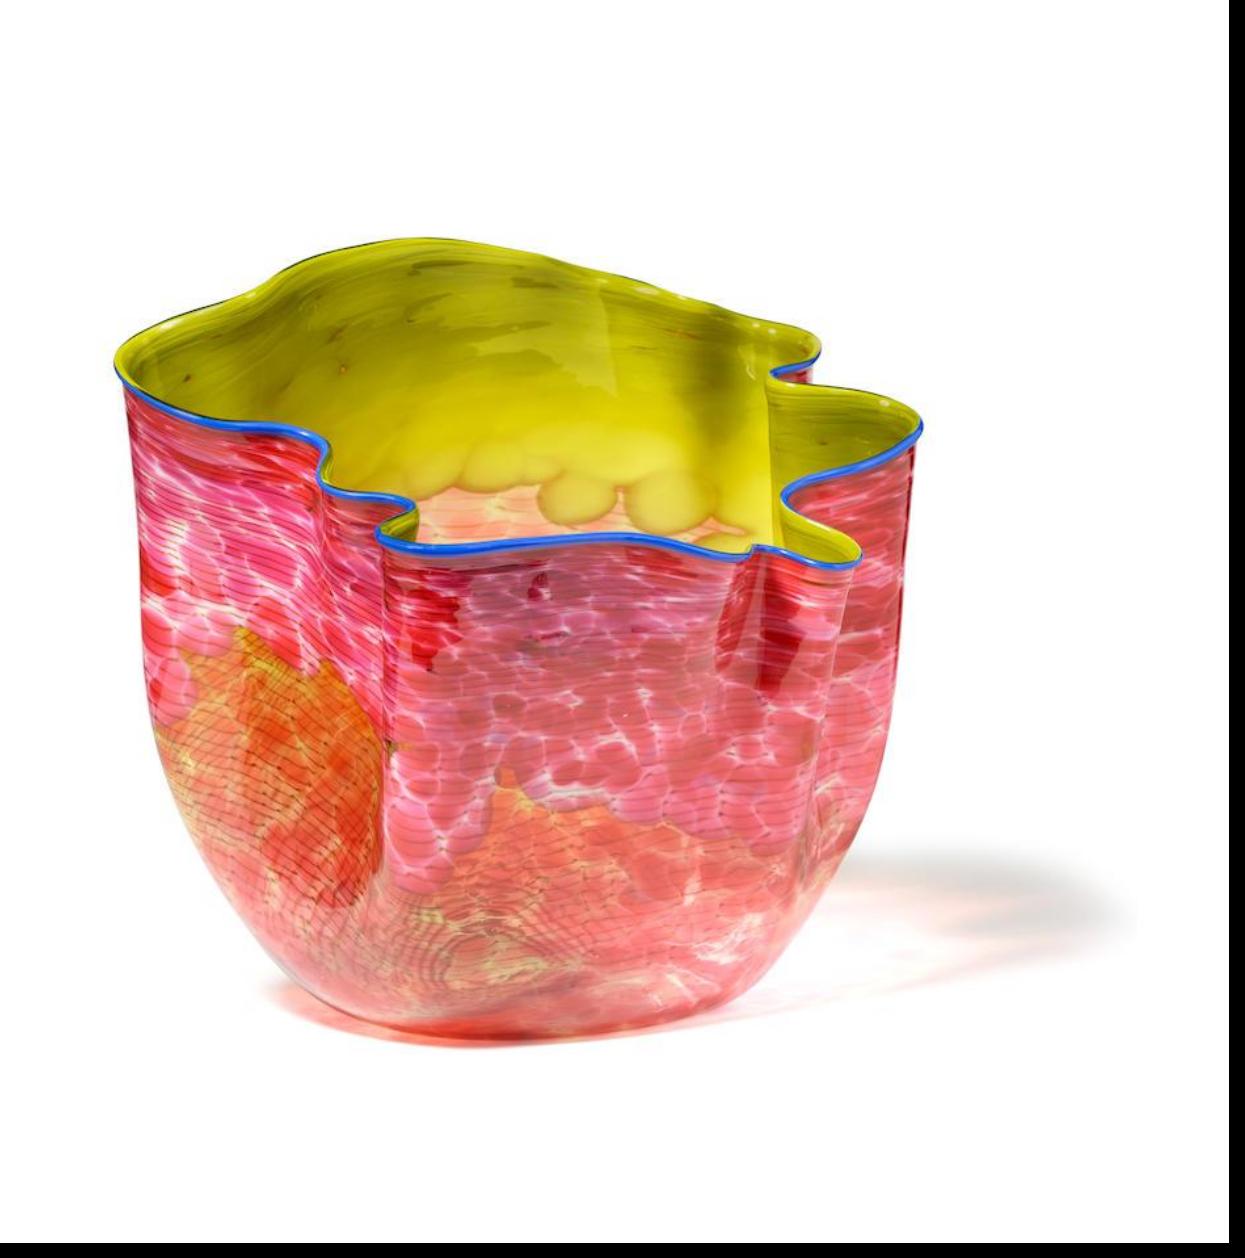 Dale Chihuly
Cranberry and Chartreuse Macchia with Lapis Lip Wrap
1984
Blown Glass 
16 x 18 x 18 in

Dale Chihuly is a contemporary American glassblower whose large-scale installations can be found on permanent display in institutions worldwide.